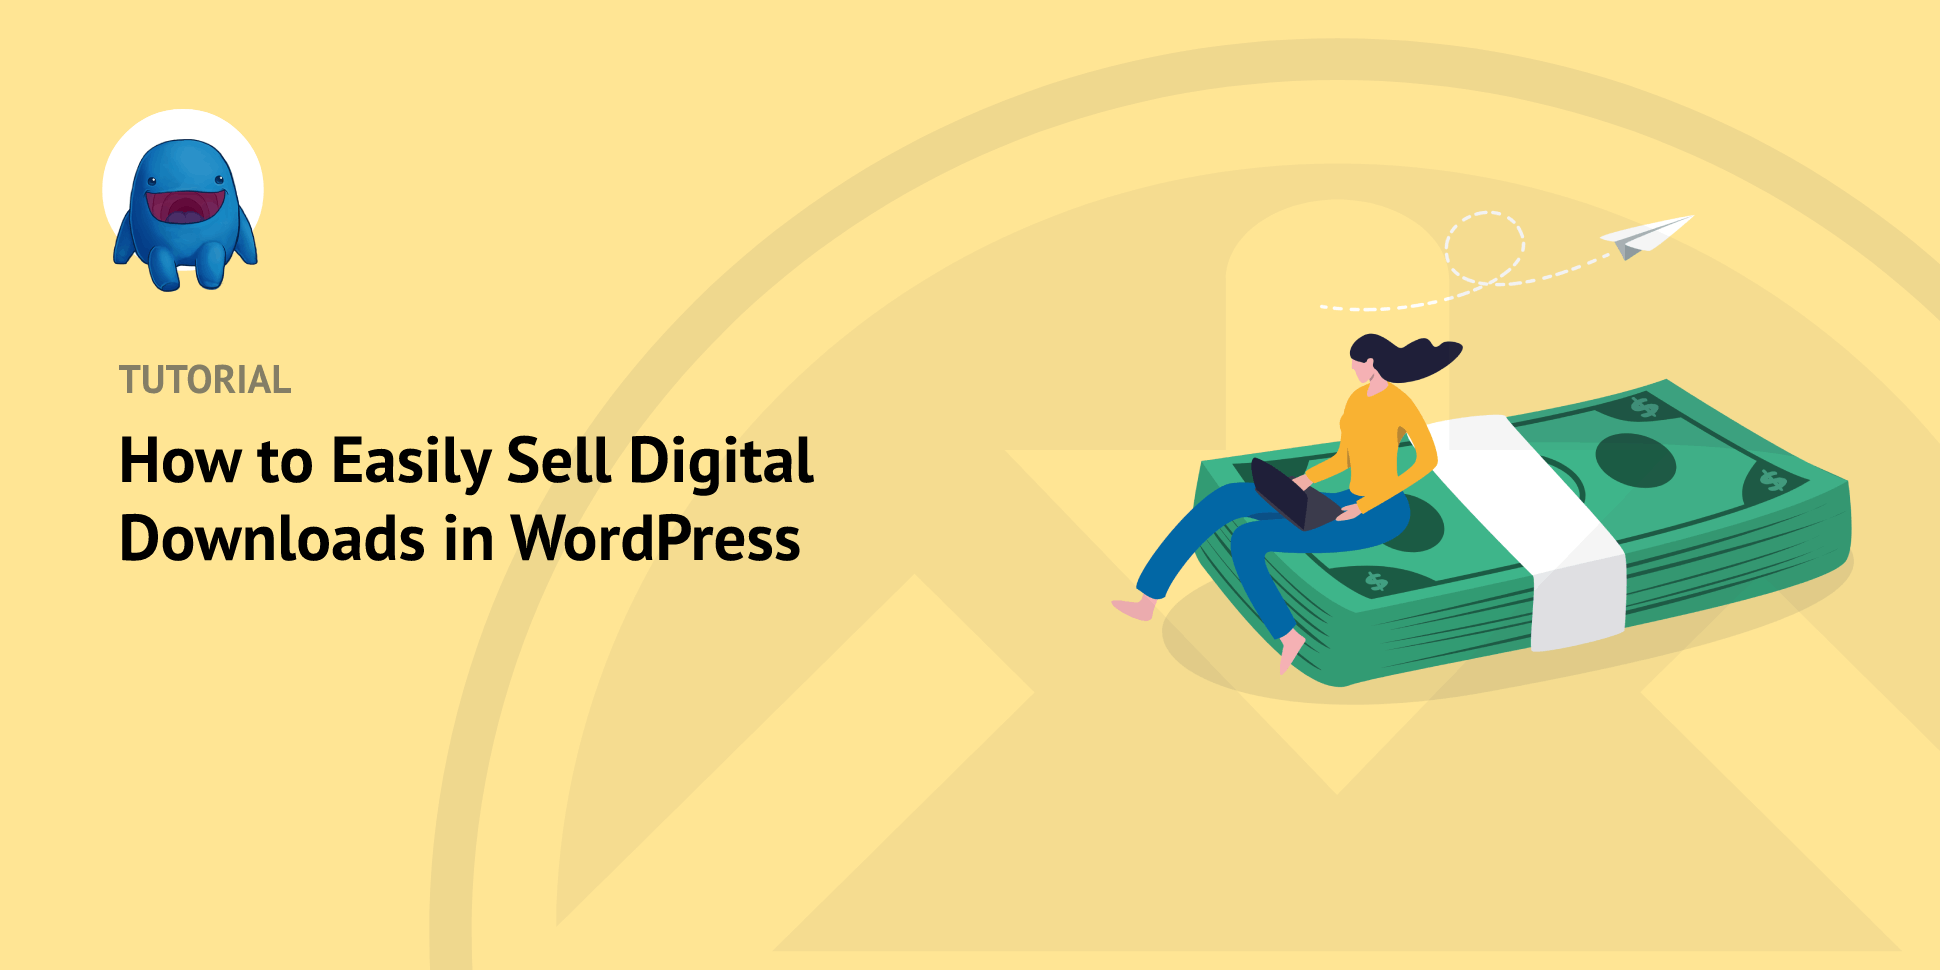 How to Easily Sell Digital Downloads in WordPress